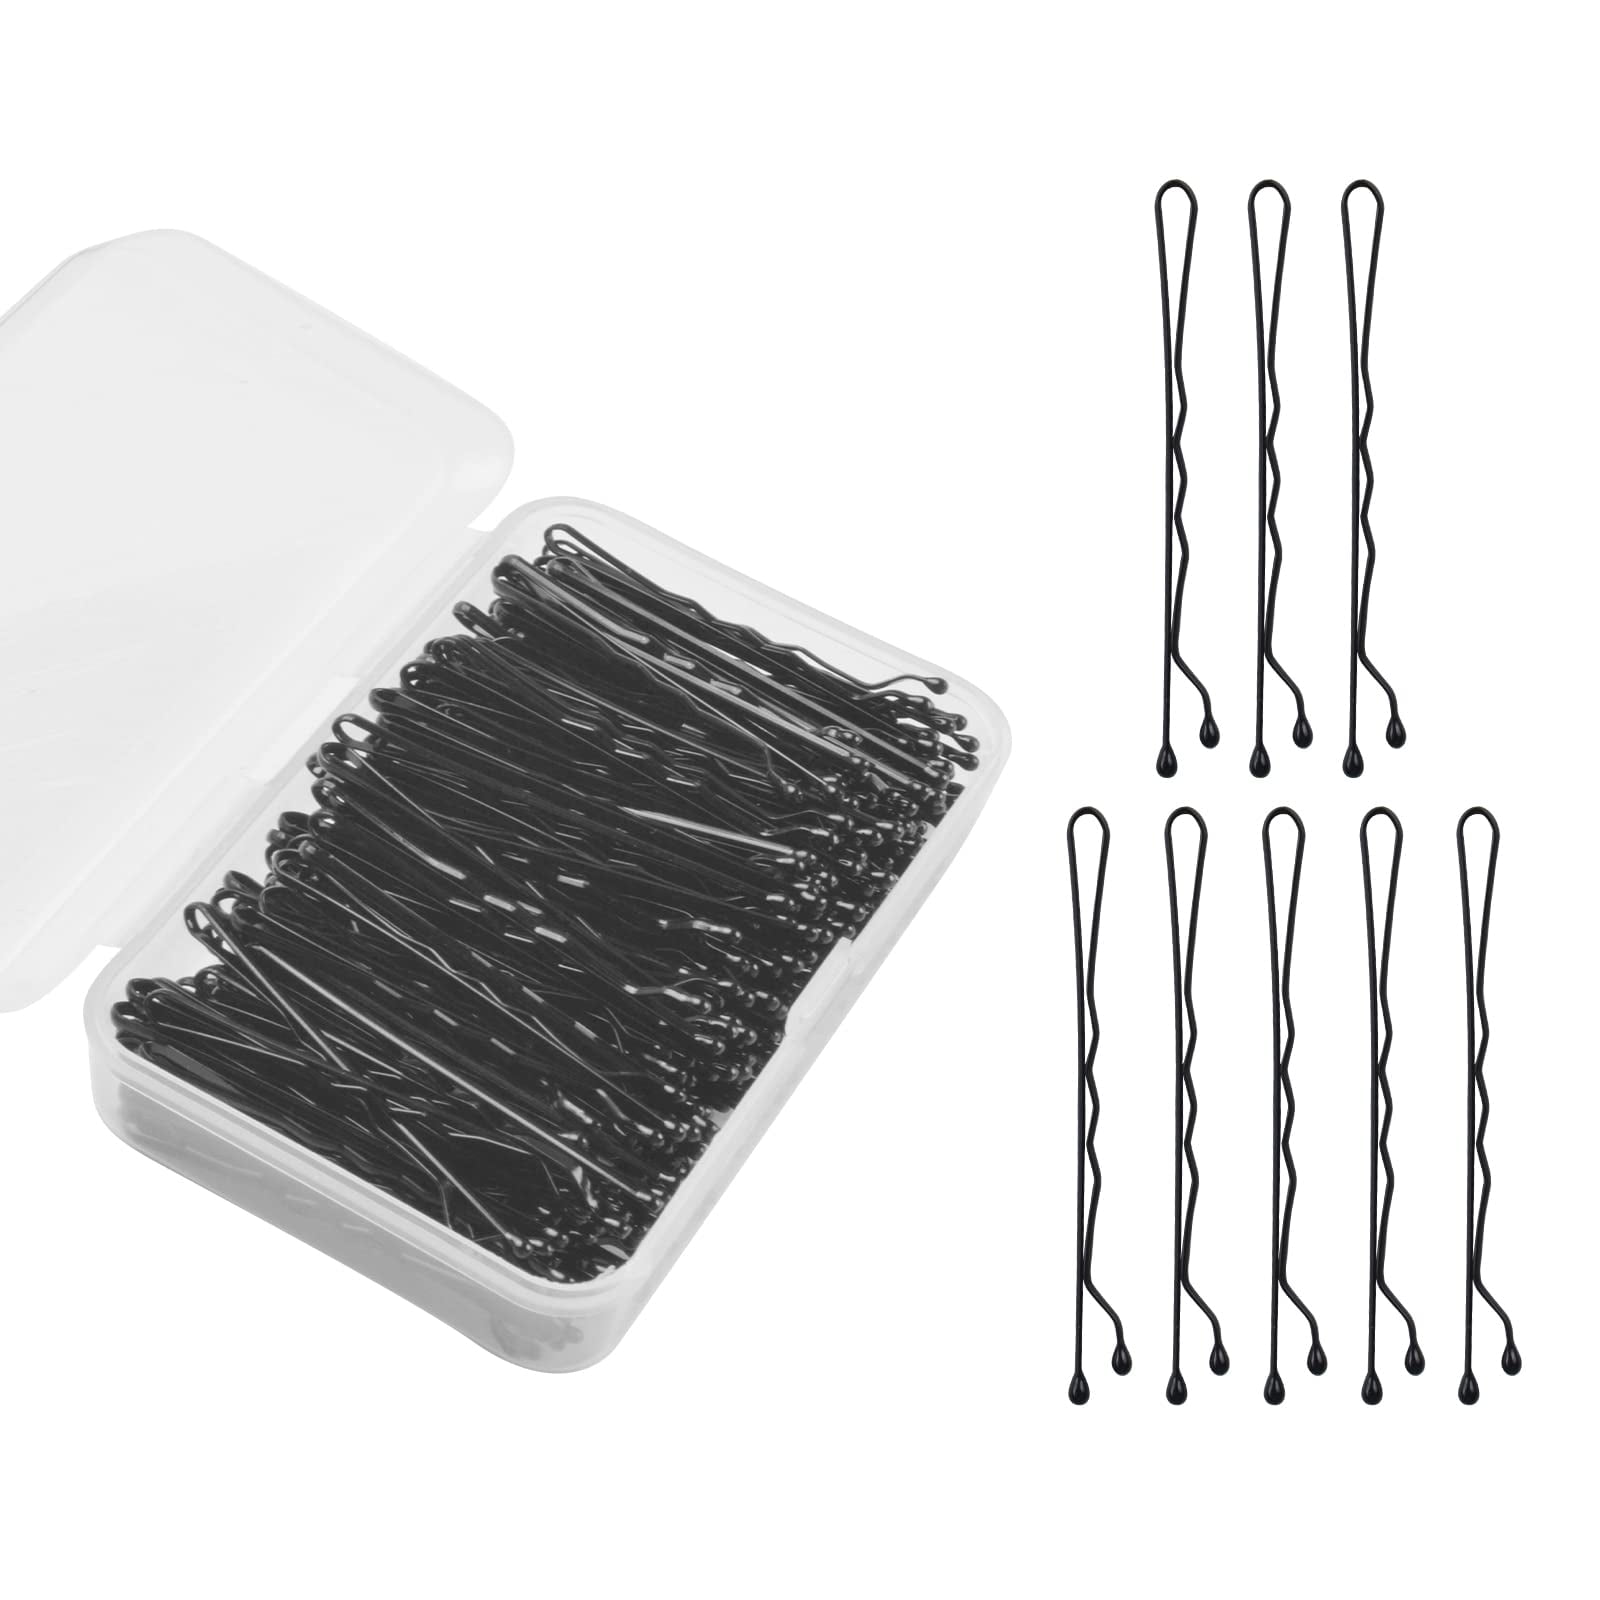 Hair Accessories For Women 150 Pcs Bobby Pins With Storage Box Black &  Brown Blonde Bobby Pins For Wedding Hairstyles, Girls Kids Hair (Black)